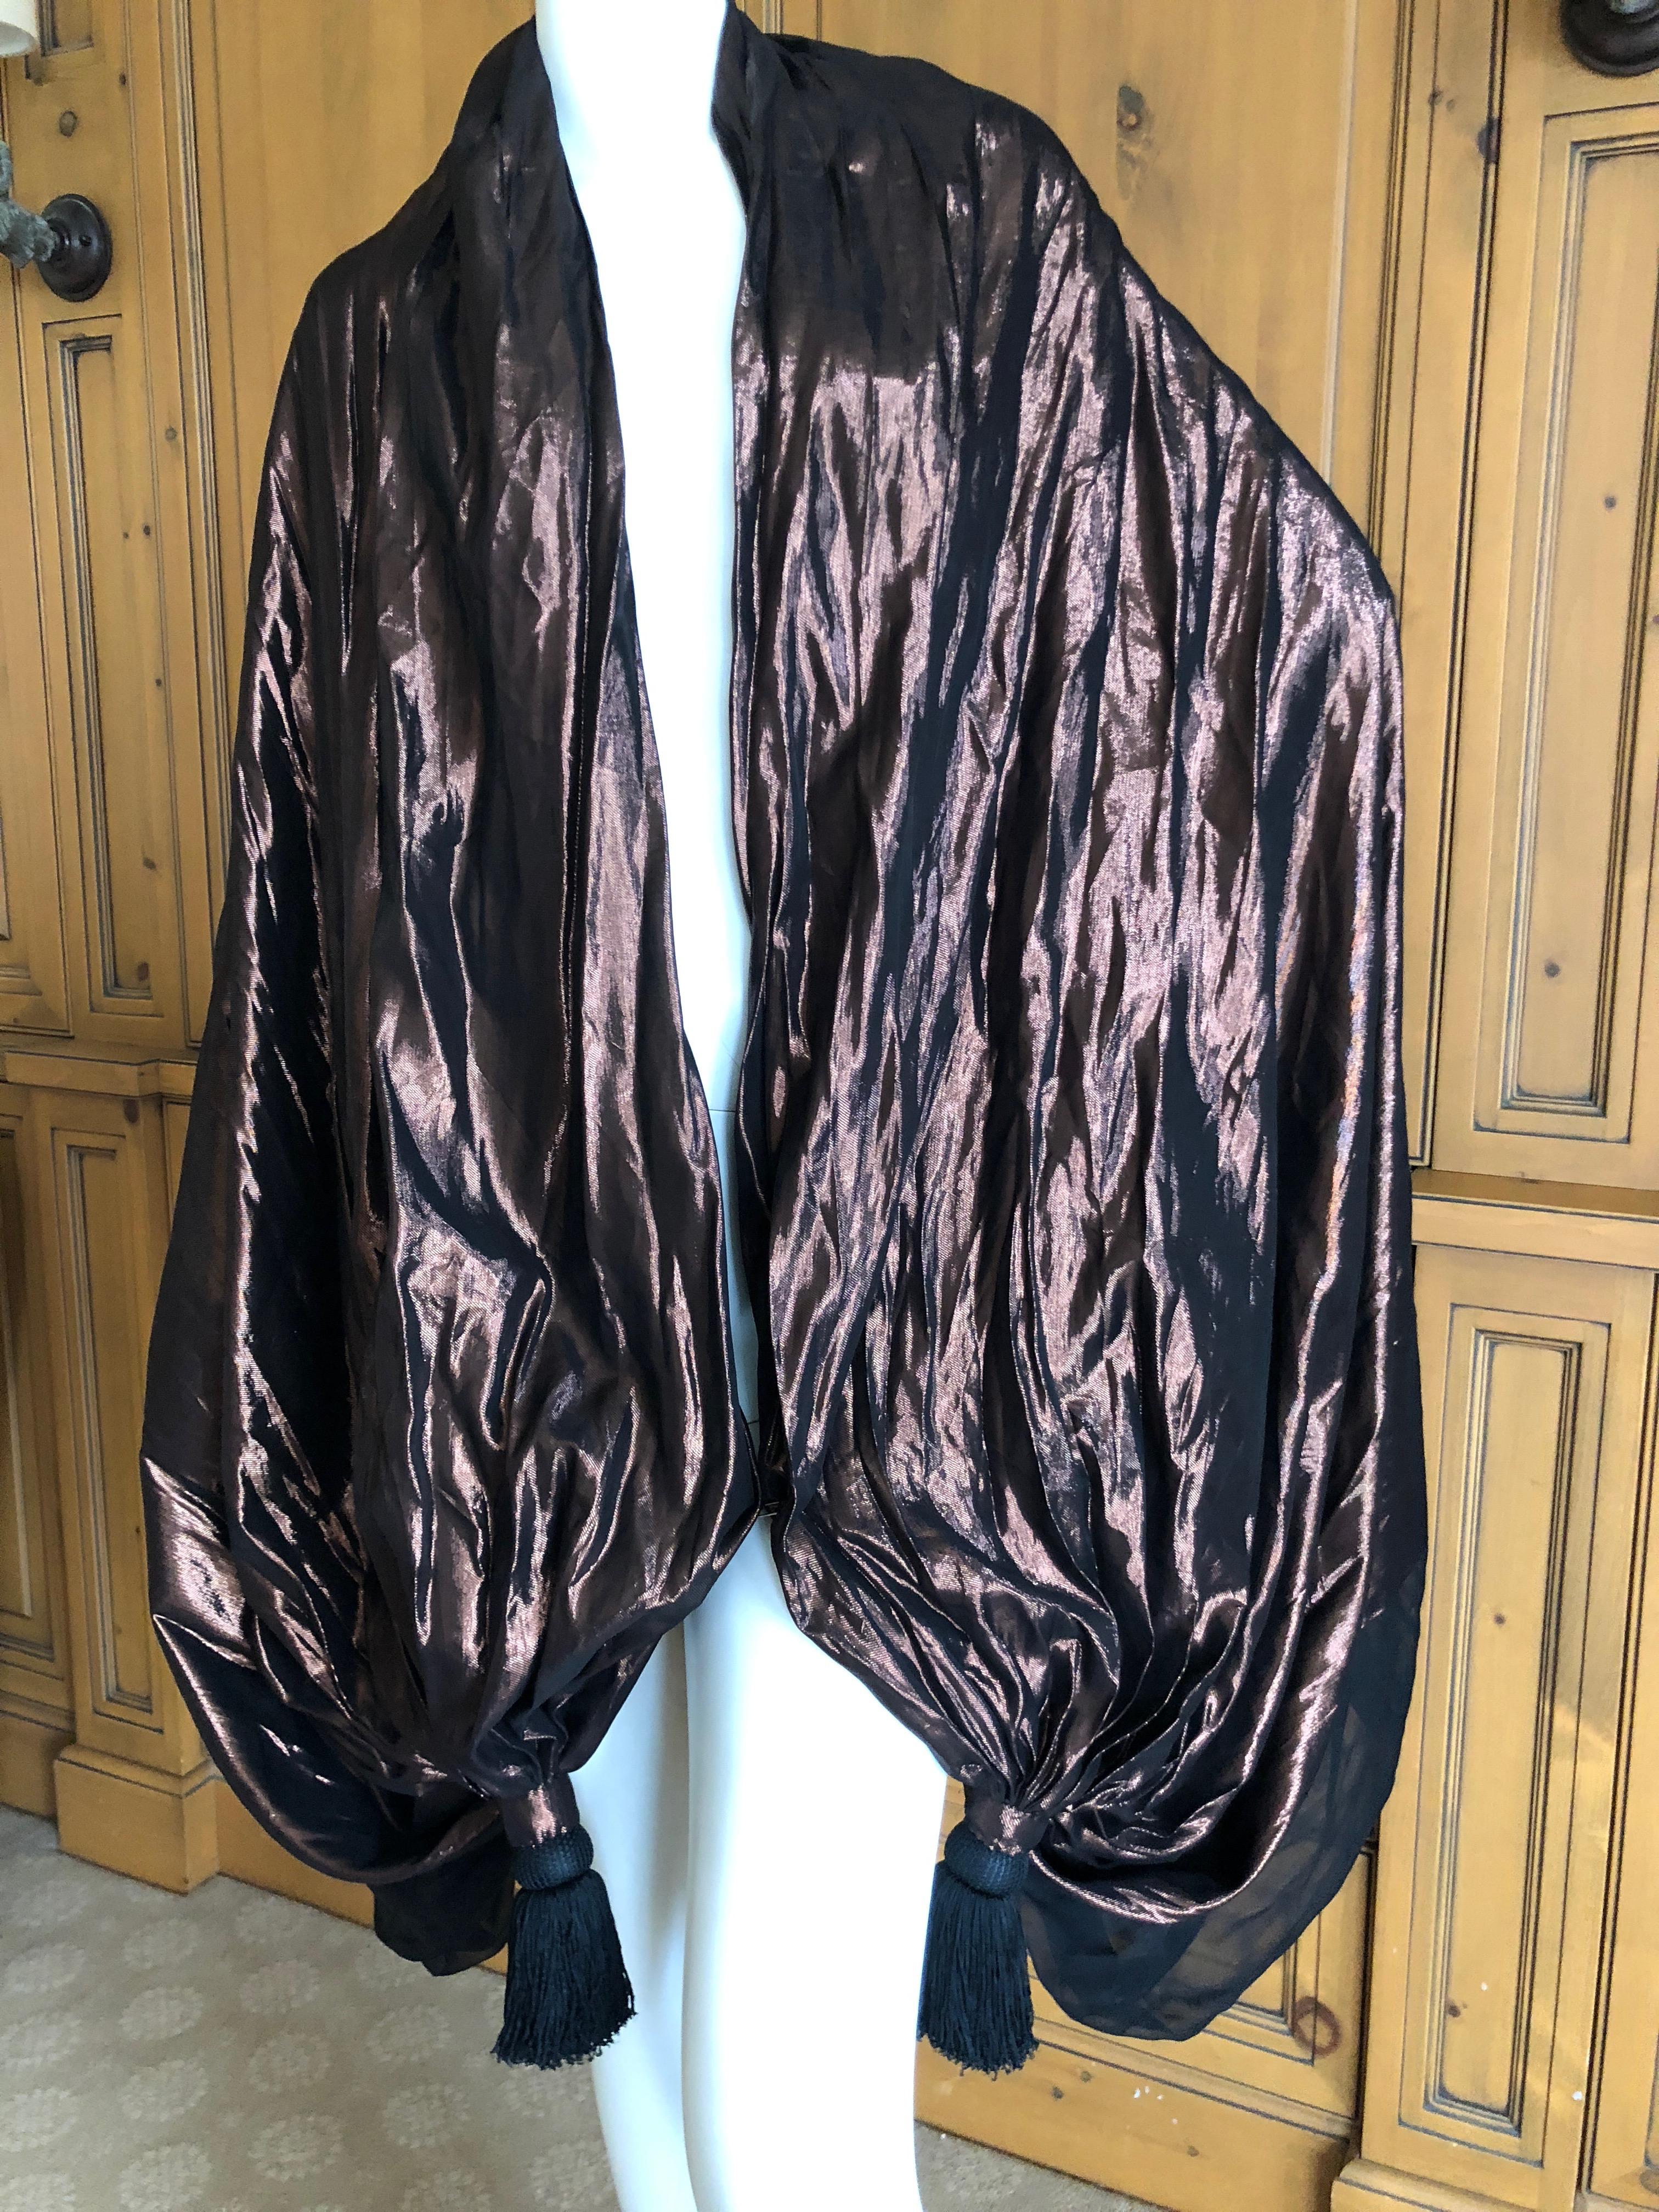 Cardinali Huge Bronze Stripe Silk Wrap Shawl with Tassels Fall 1973

From the Archive of Marilyn Lewis, the creator of Cardinali
Cardinali was founded in Los Angeles in 1970, by Marilyn Lewis, who had already found success as the founder and owner